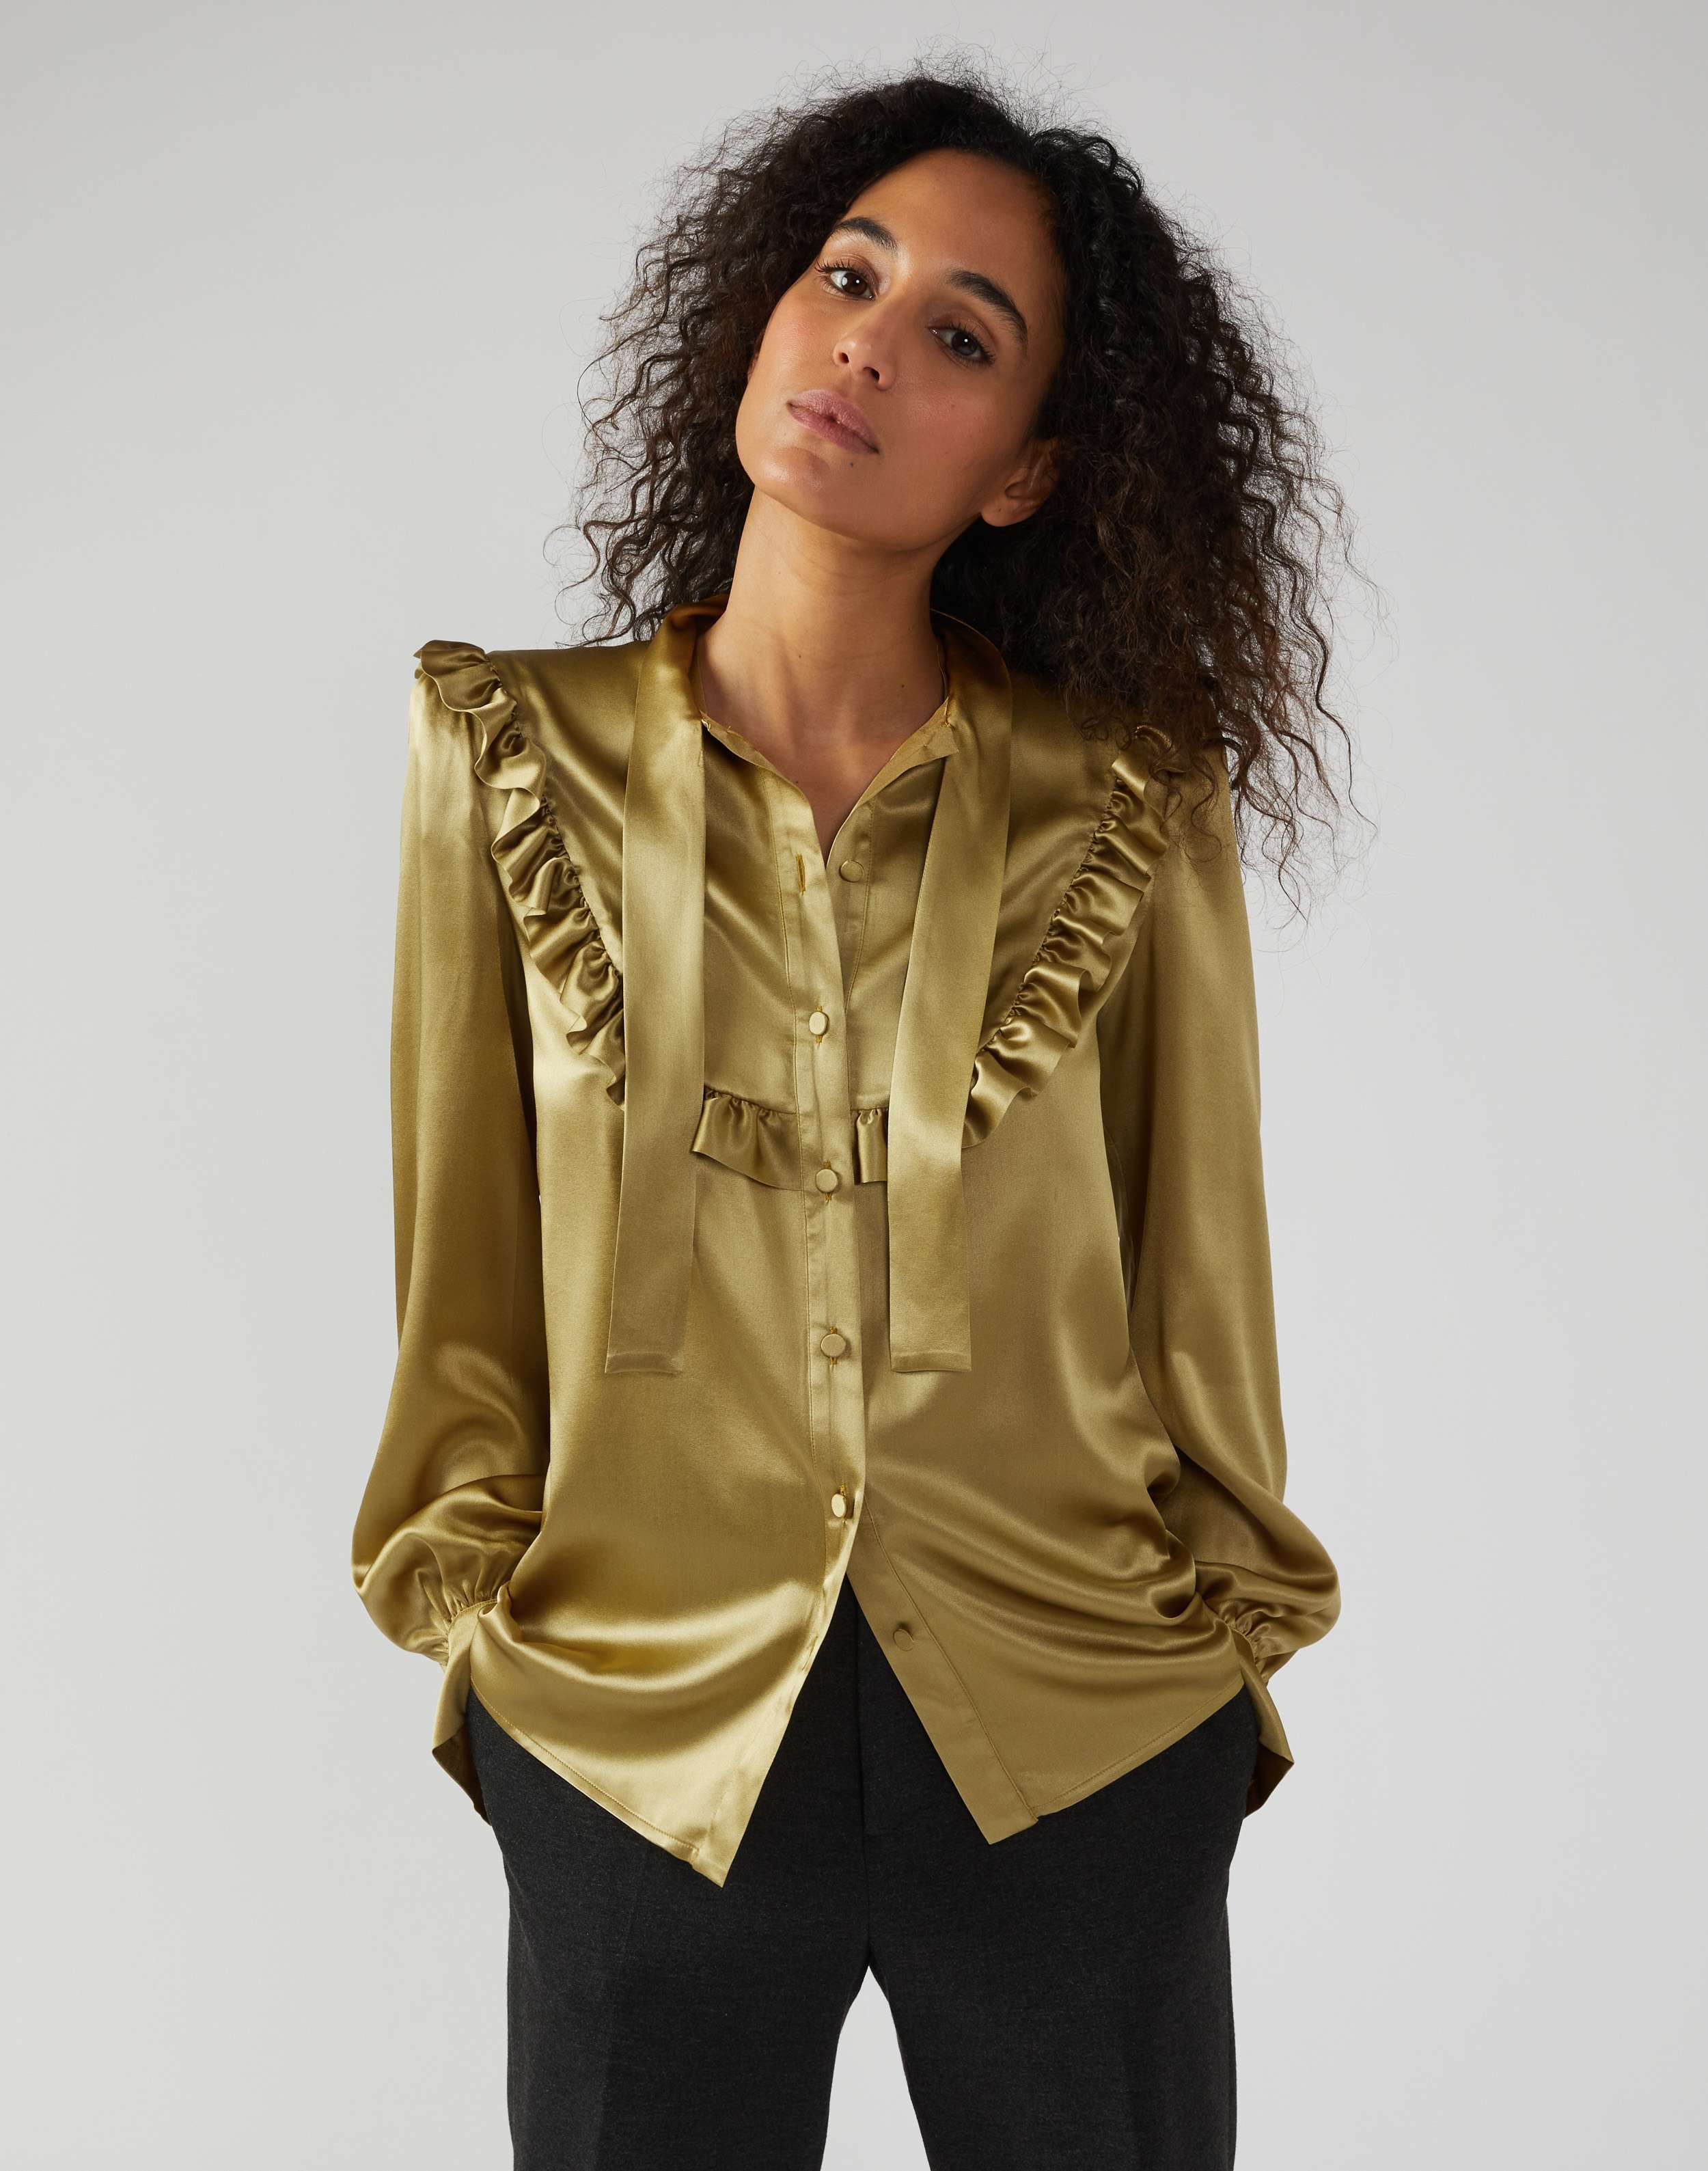 Shirt in green silk with ruffles and bow embellishment